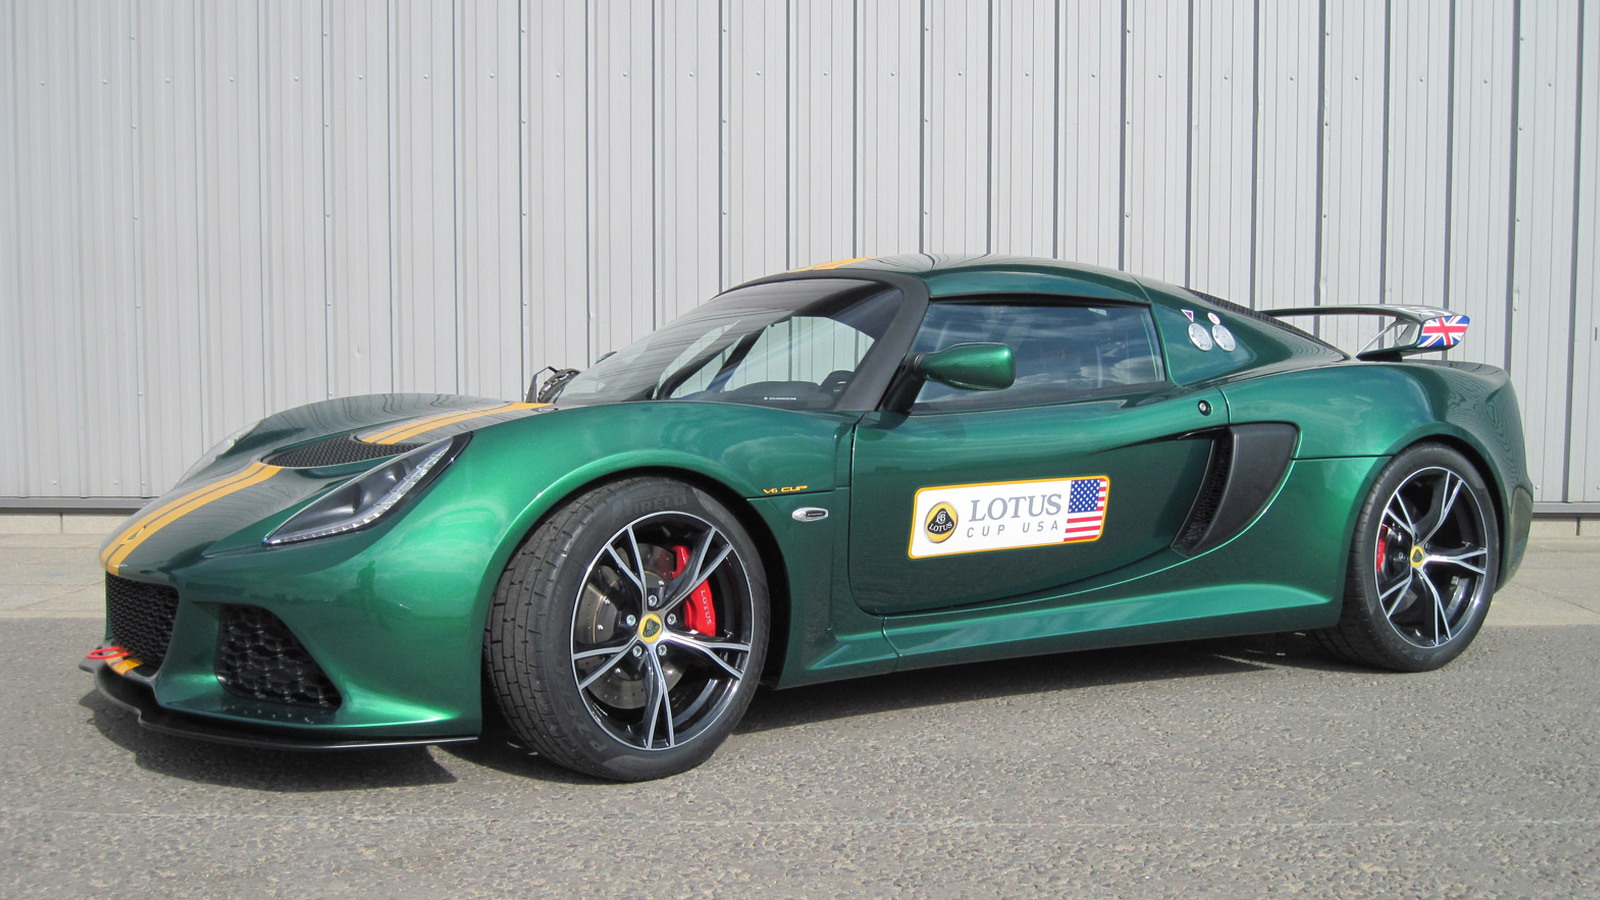 2012 Lotus Exige V6 Cup track day car